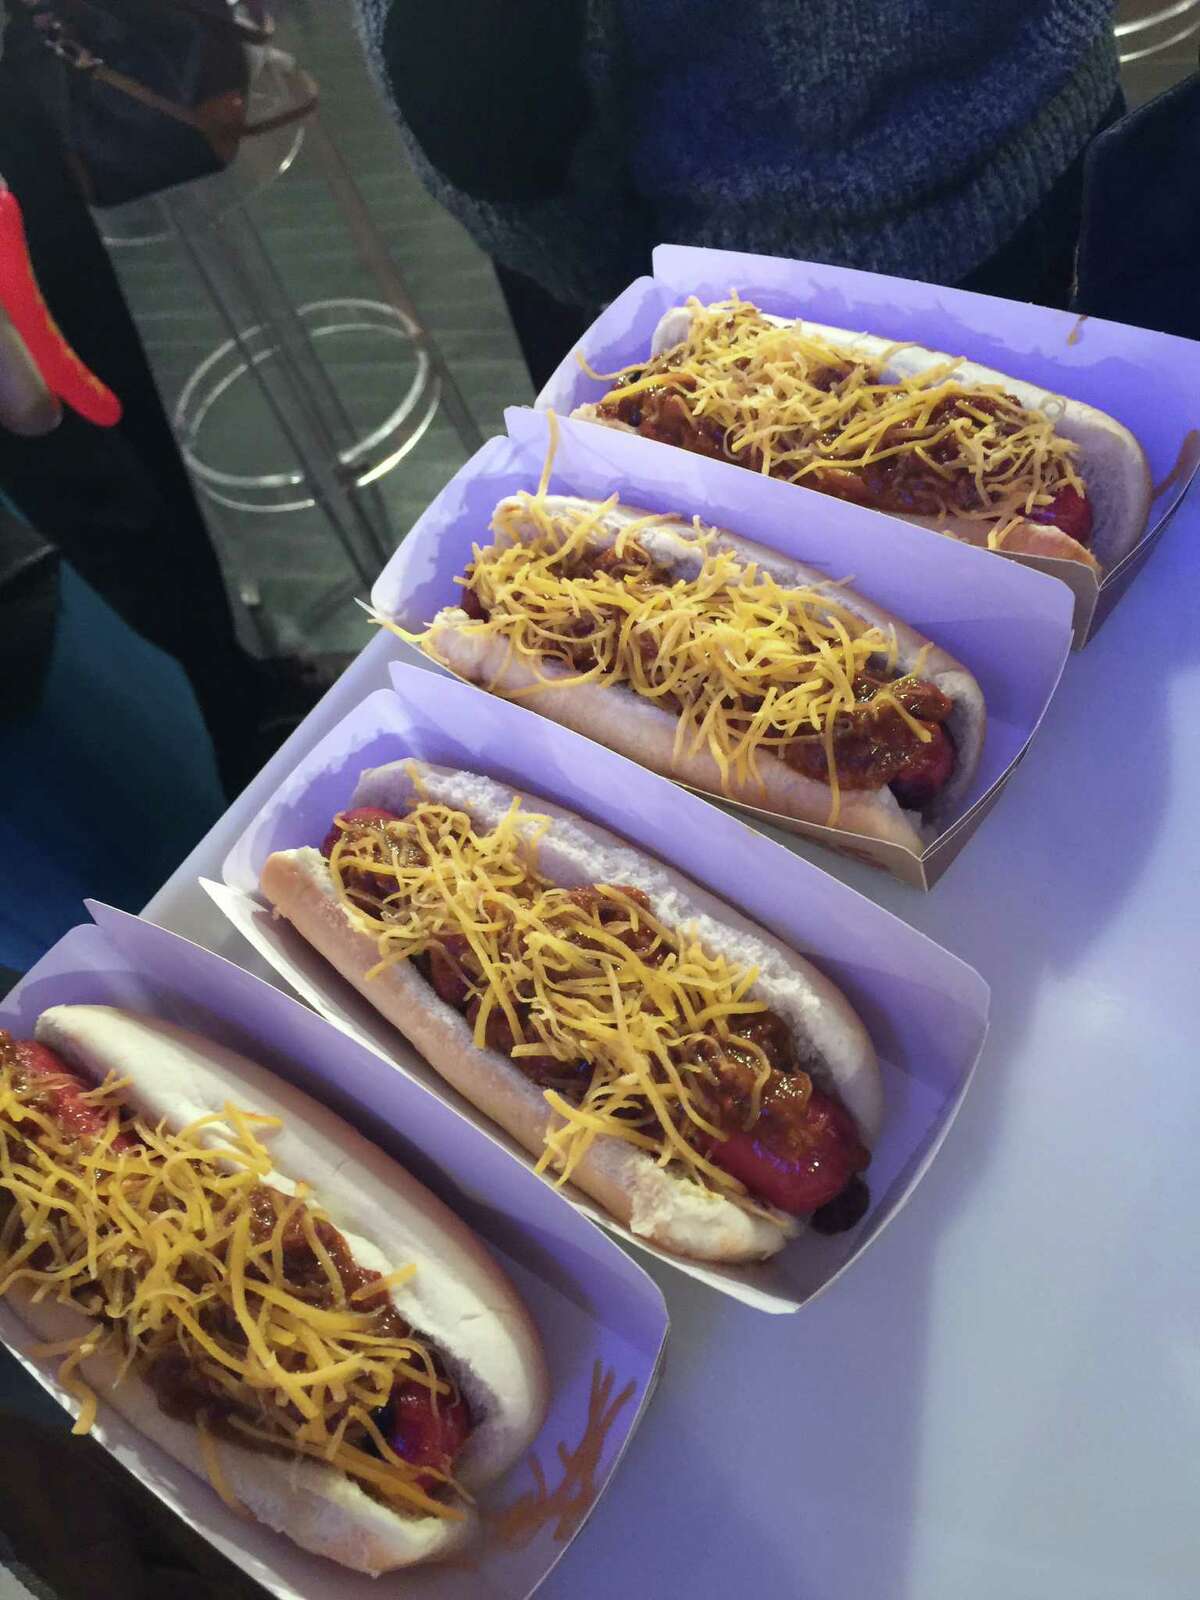 Burger King plans to put hot dogs on its menu nationally starting Feb. 23. A chili cheese hot dog will be available as well as a classic dog. ﻿